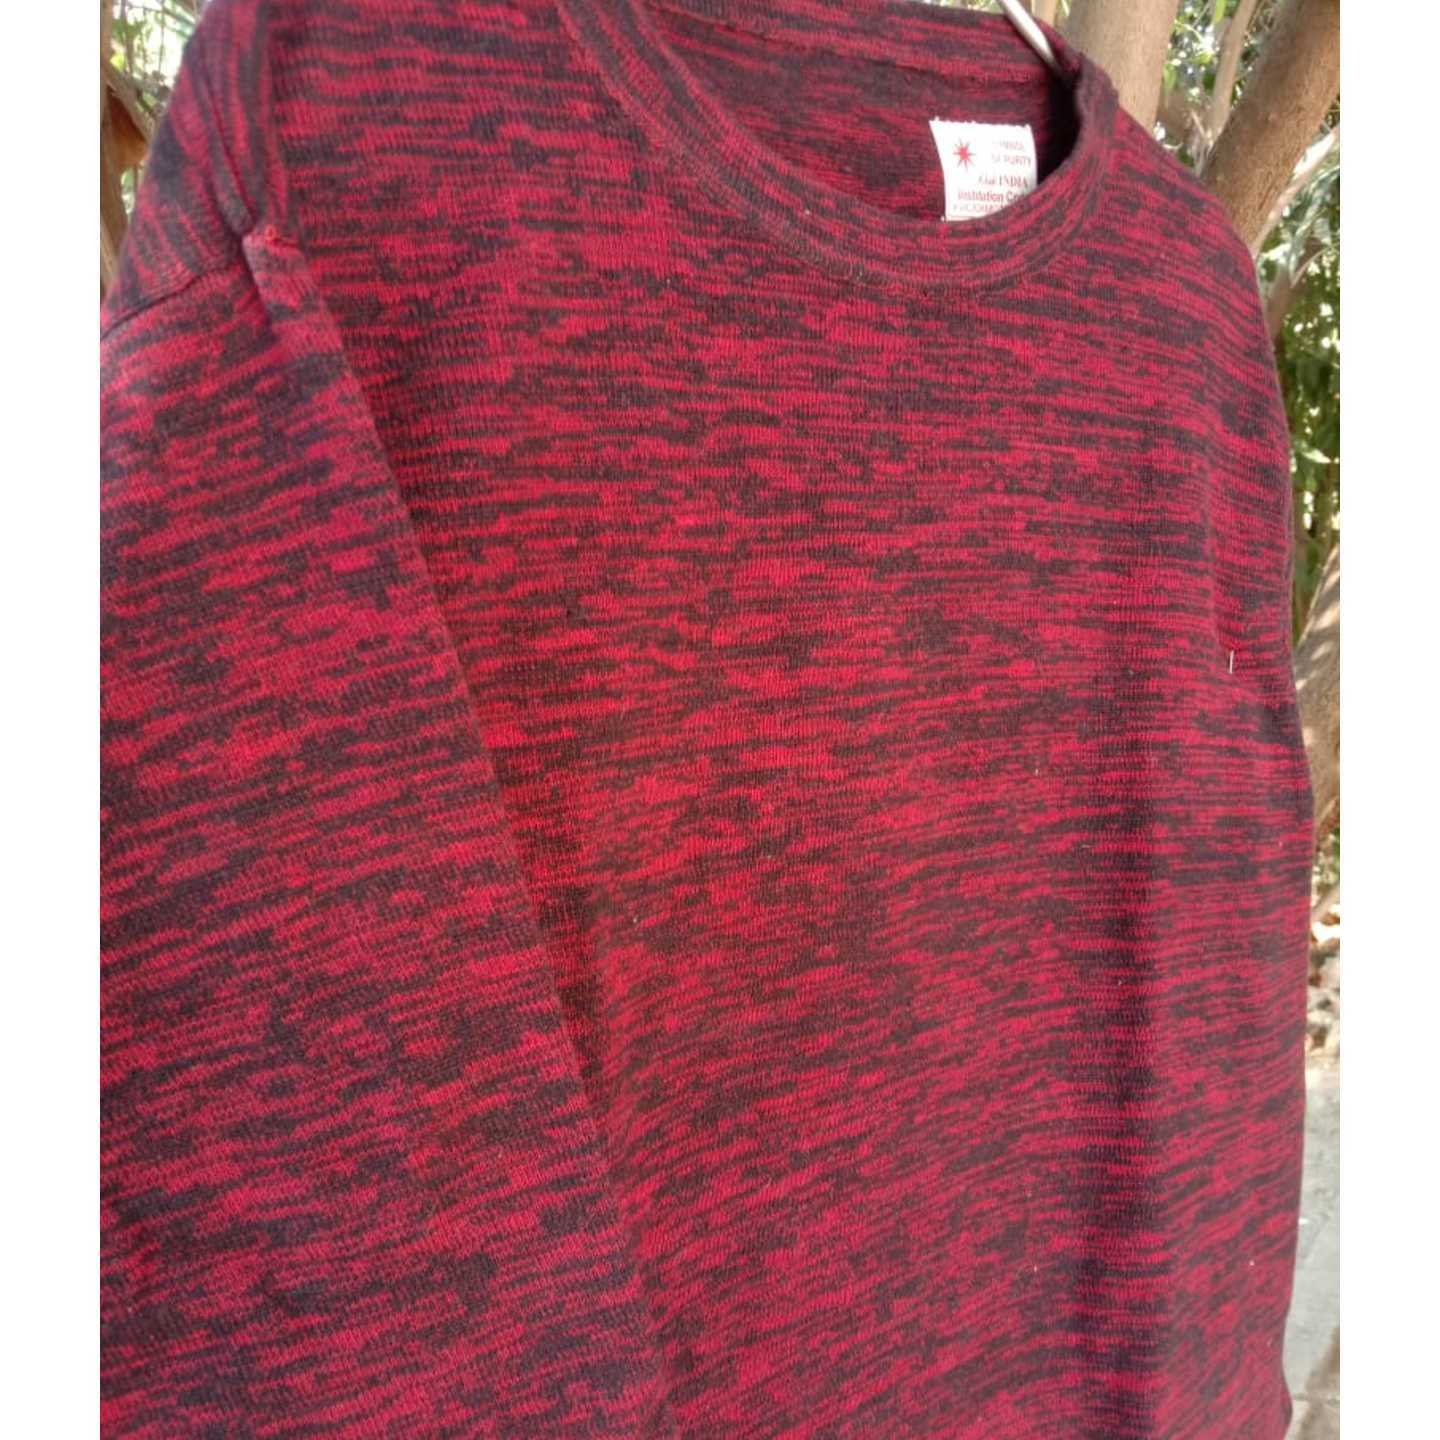 Red and Black Textured Full Sleeves T-Shirt